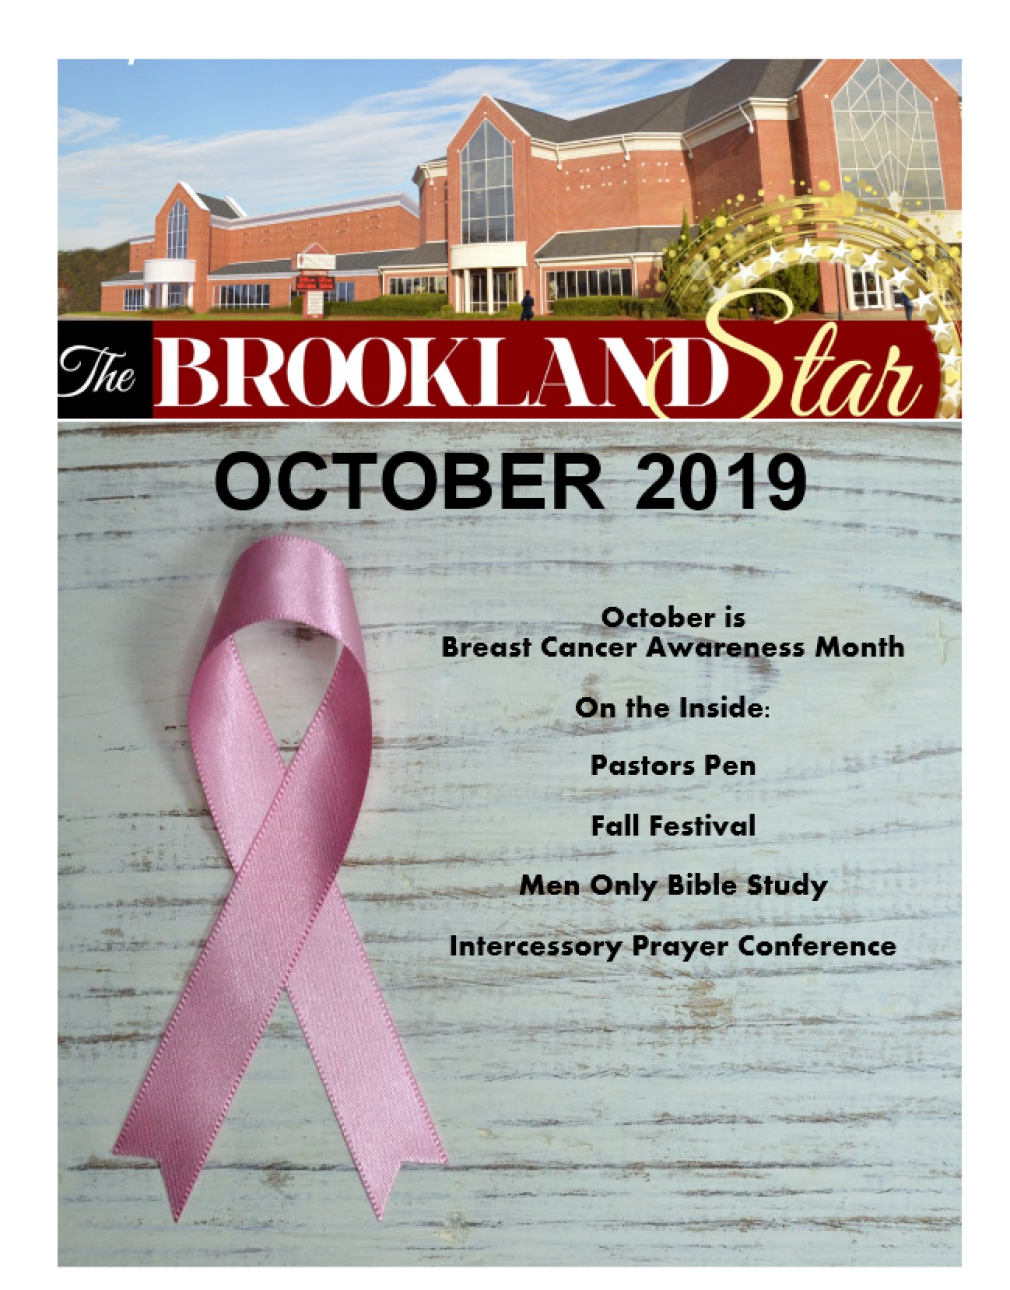 The Brookland Star October 2019 Edition